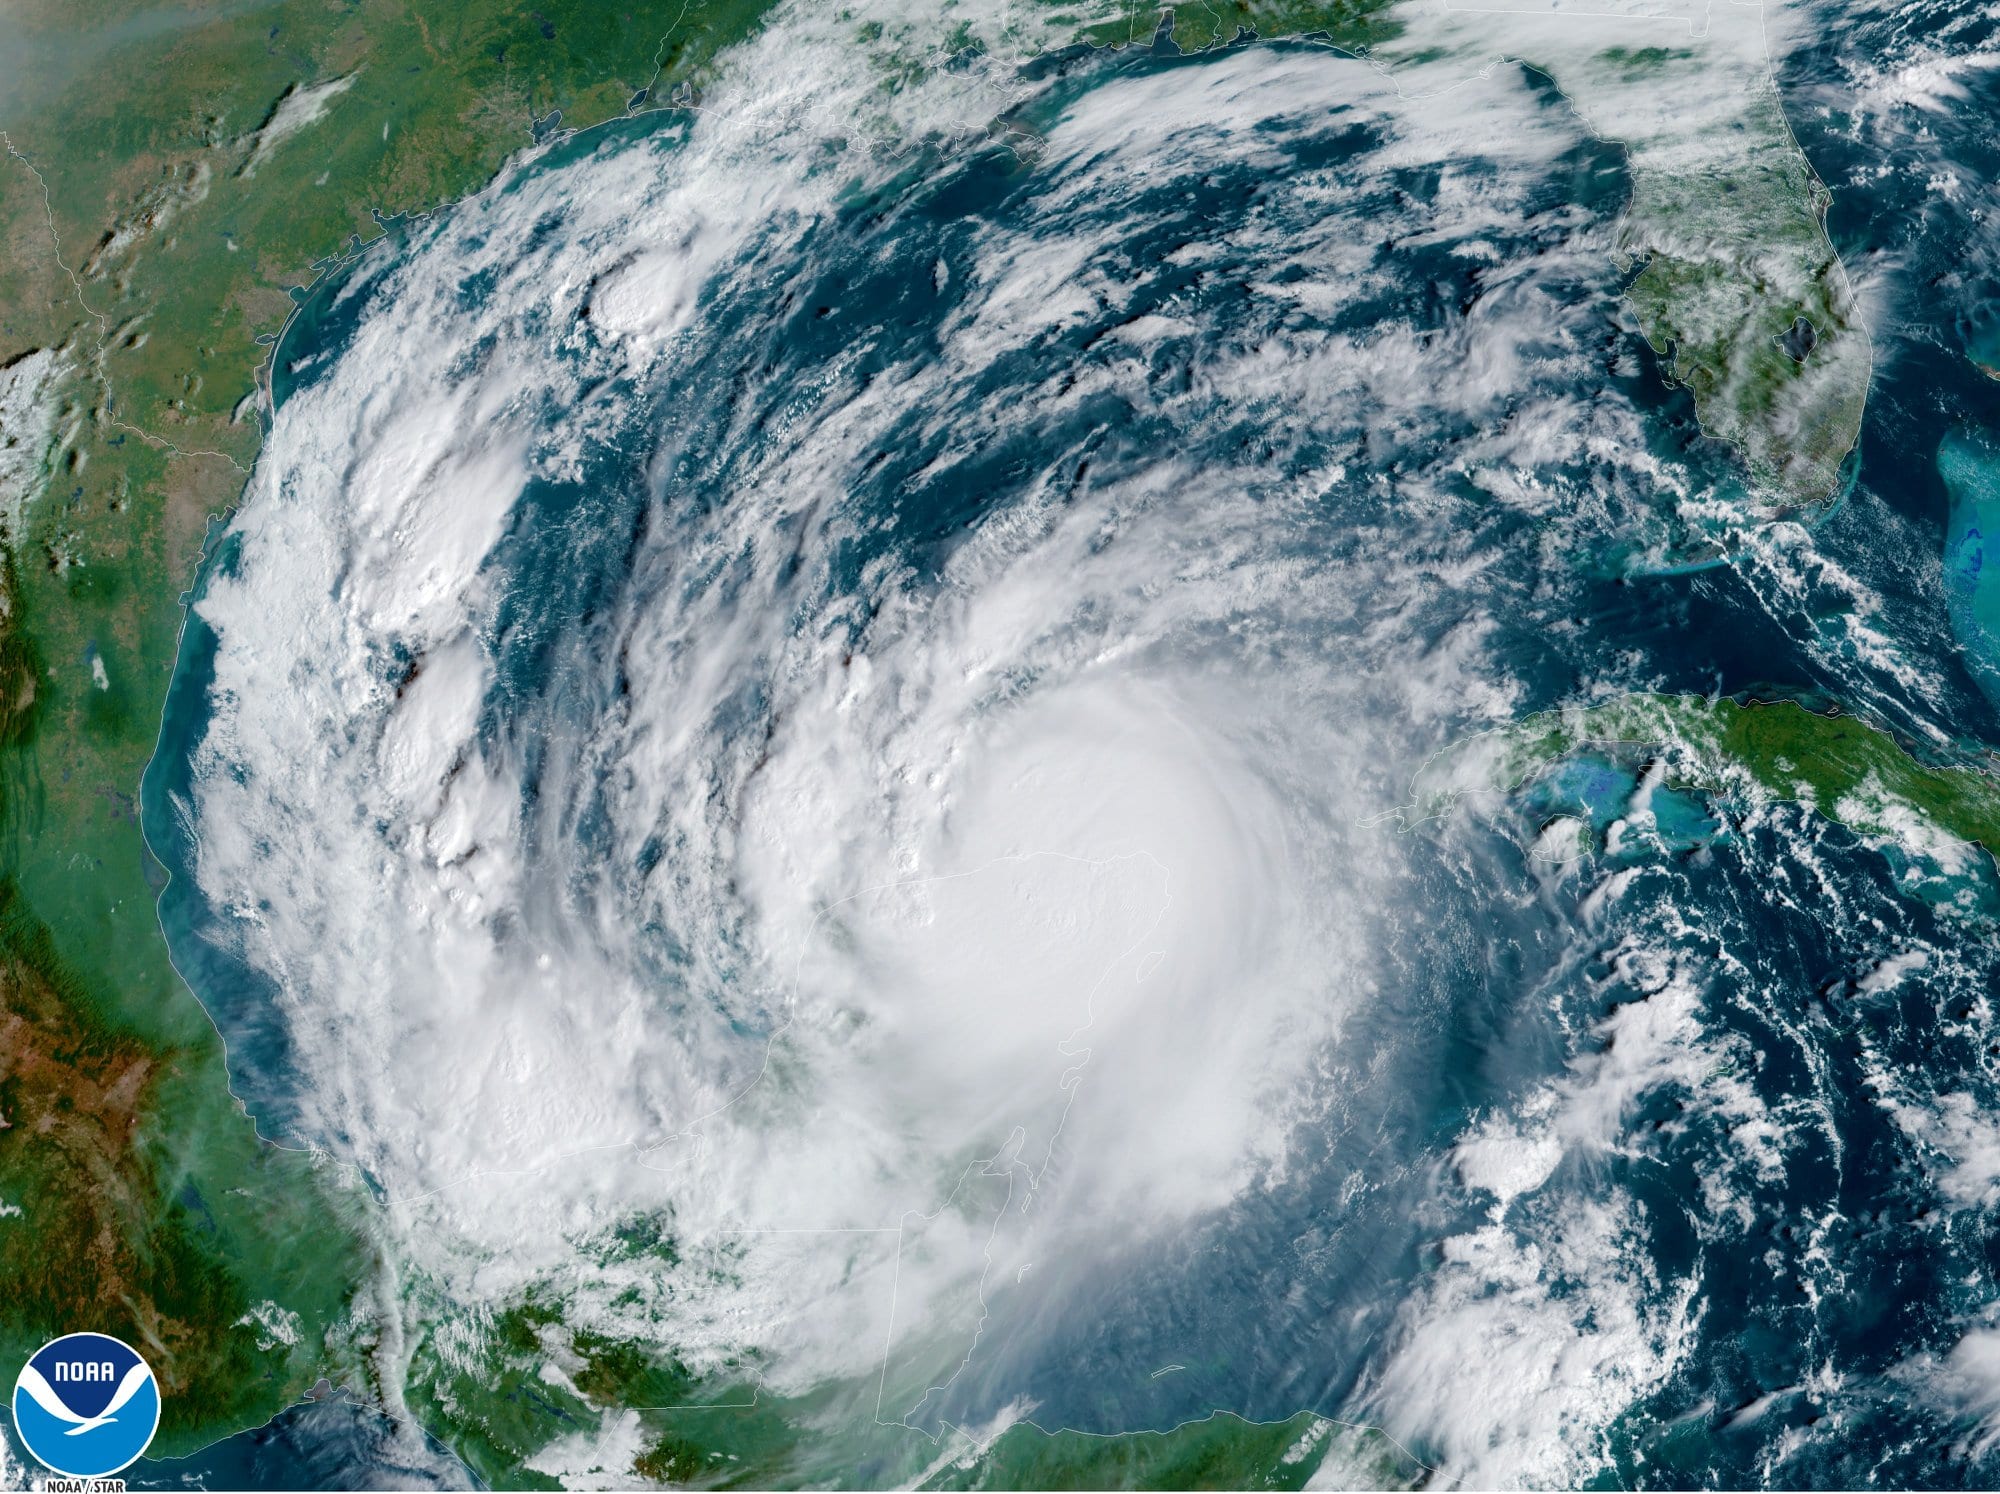 Gulf of Mexico Energy Industry Preps for Massive Hurricane